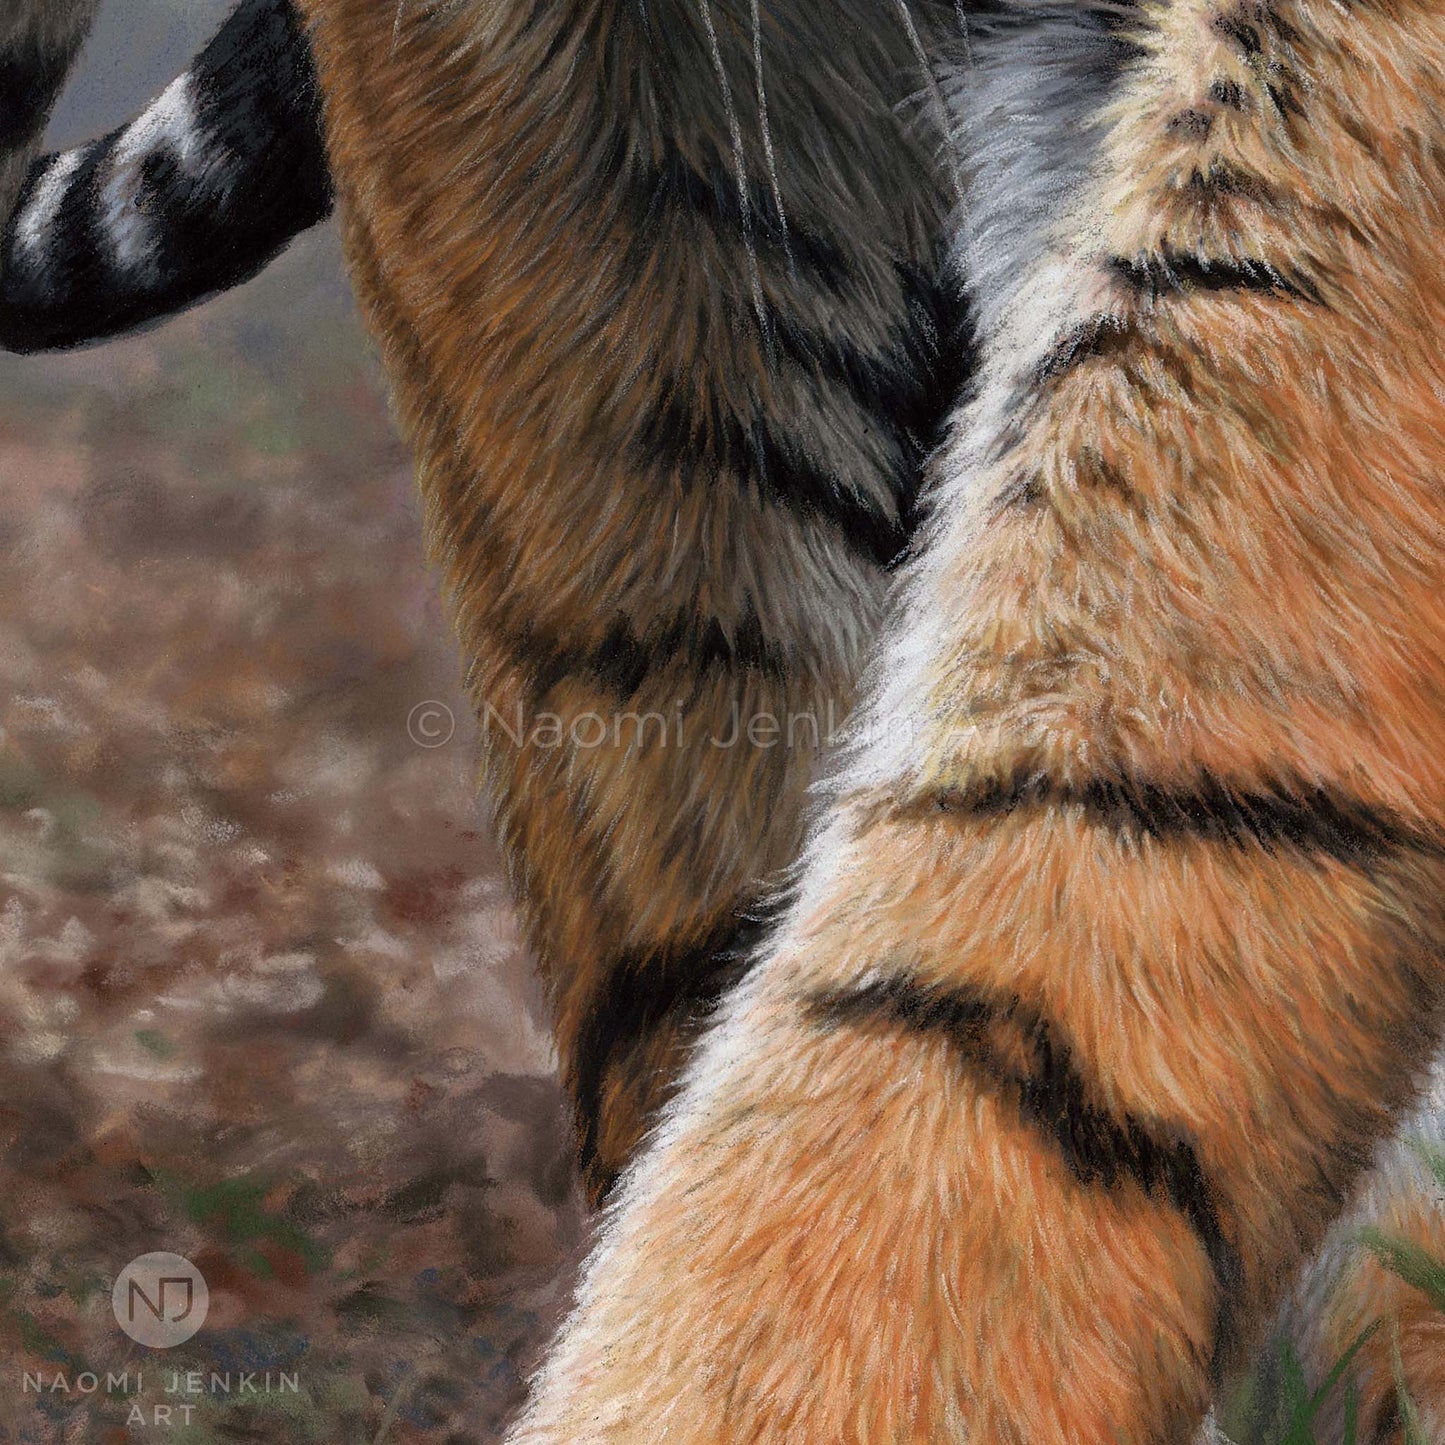 Close up detail from tiger painting "Stealth" by Naomi Jenkin Art